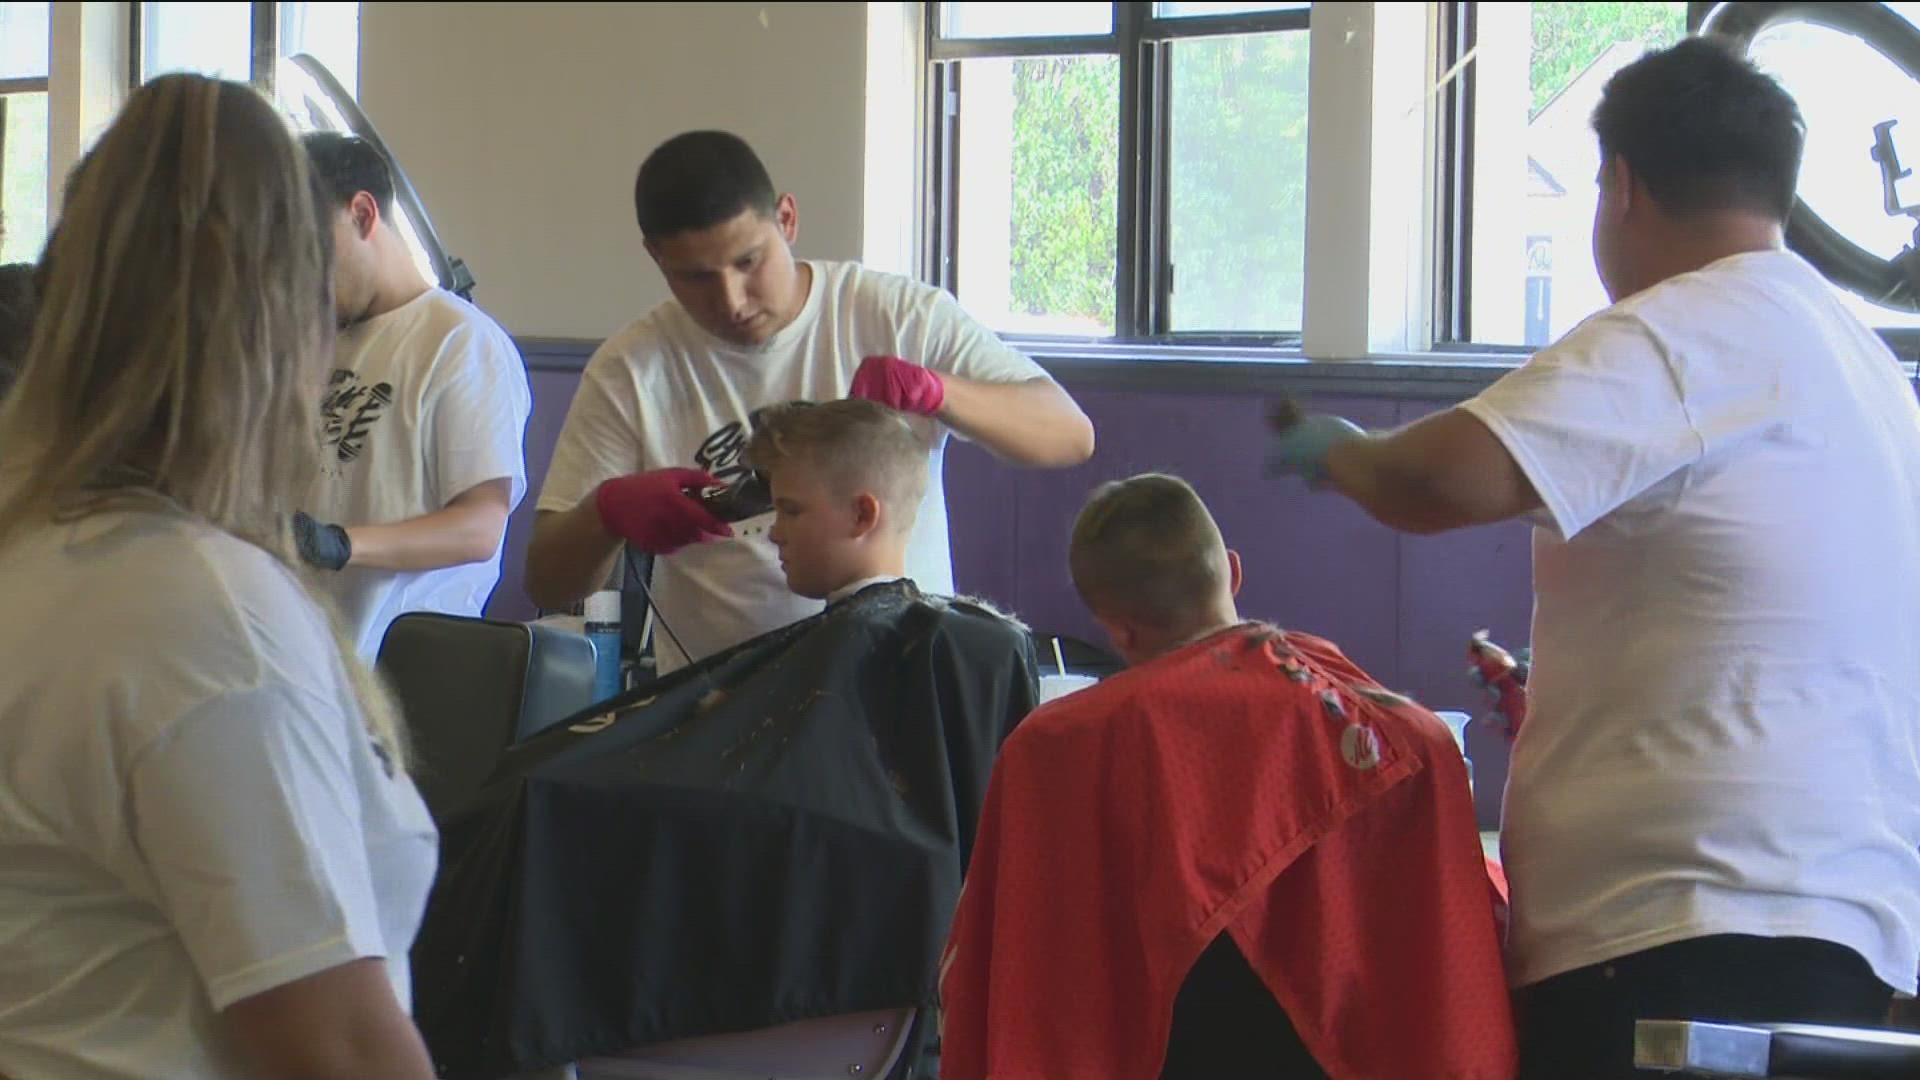 In addition to the free haircuts, the Caldwell barbers also handed out free school supplies to those in need.